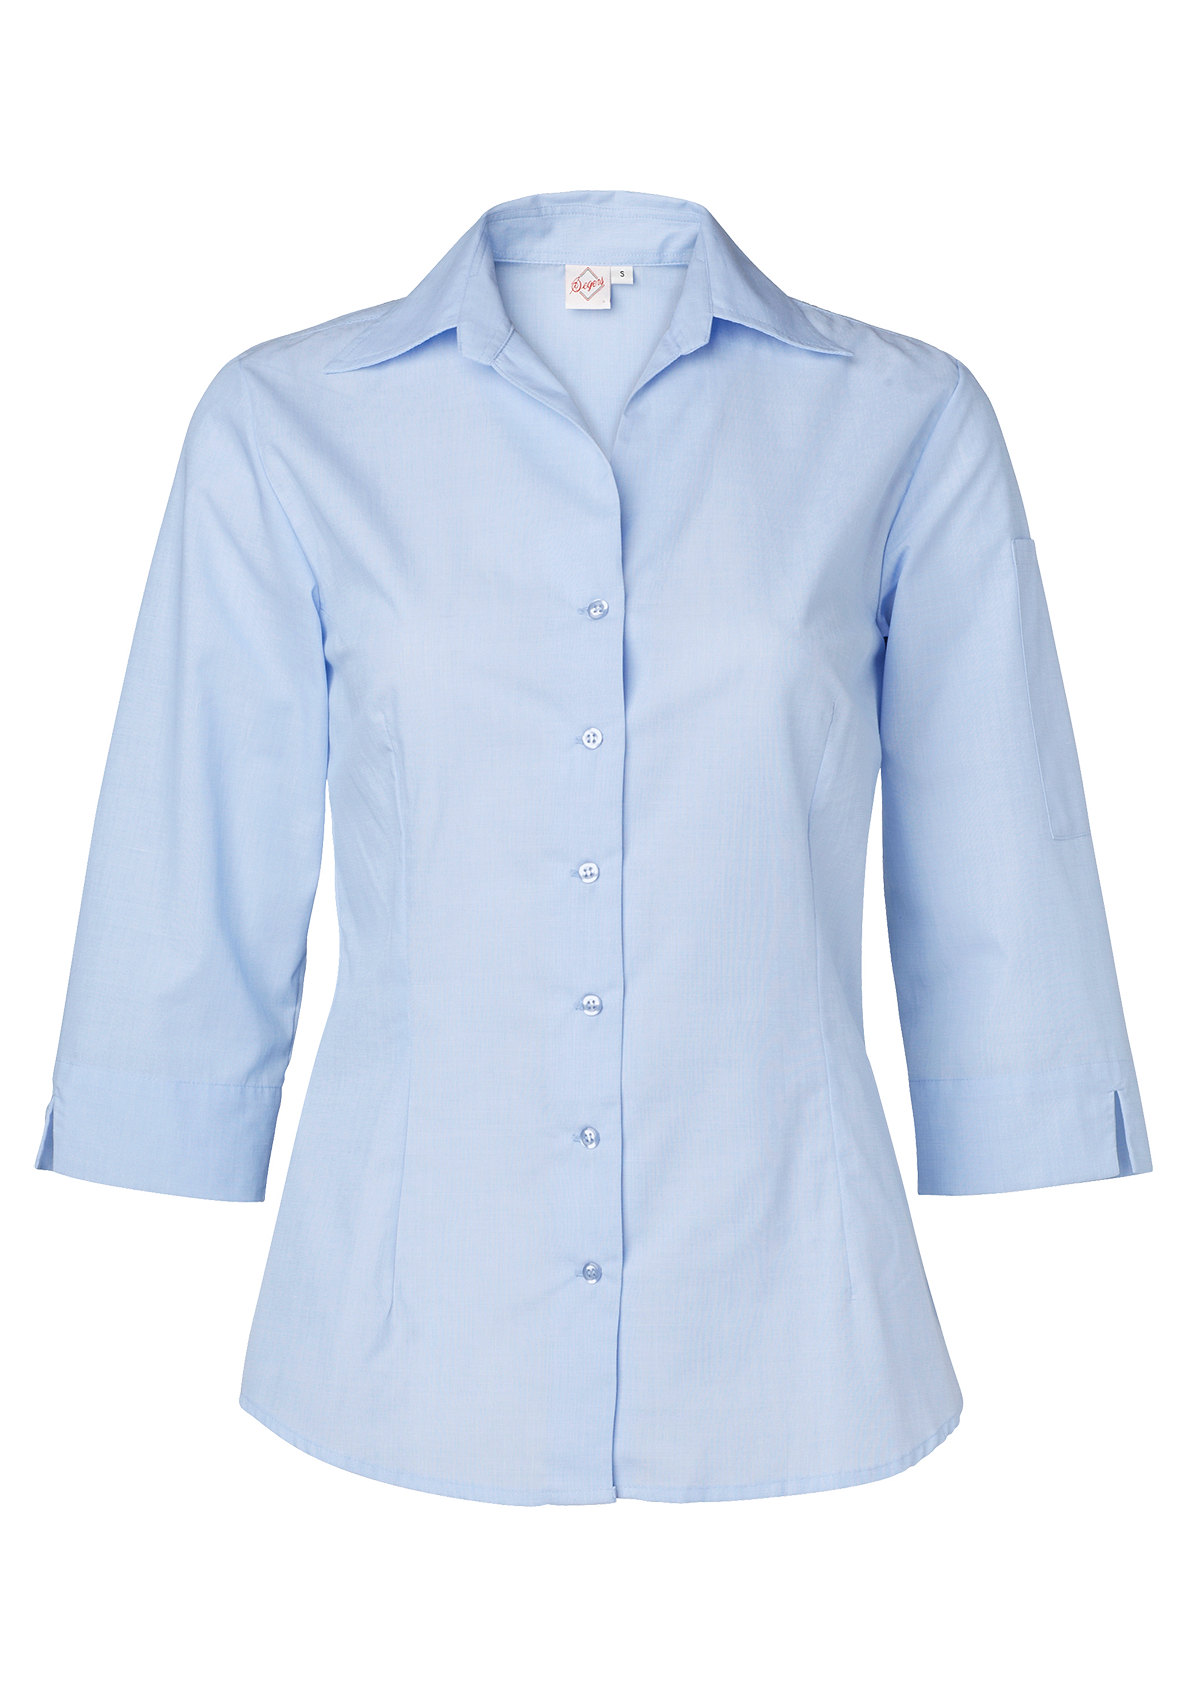 Women's blouse with three-quarter sleeves. Segers | Cookniche